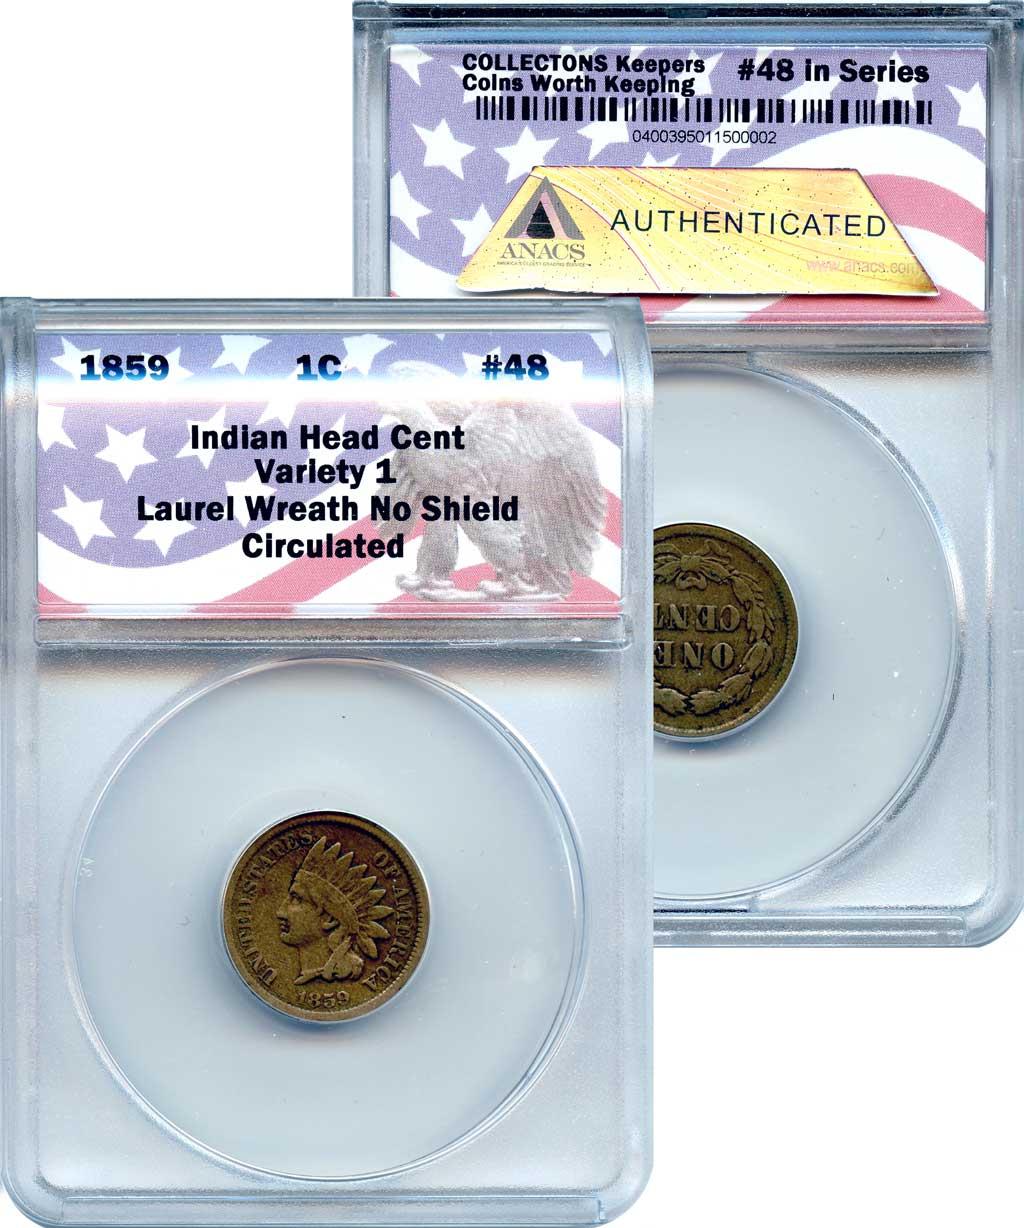 CollecTons Keepers #48: 1859 Type 1 Indian Head Cent with Laurel Wreath Certified in Exclusive ANACS Circulated Holder